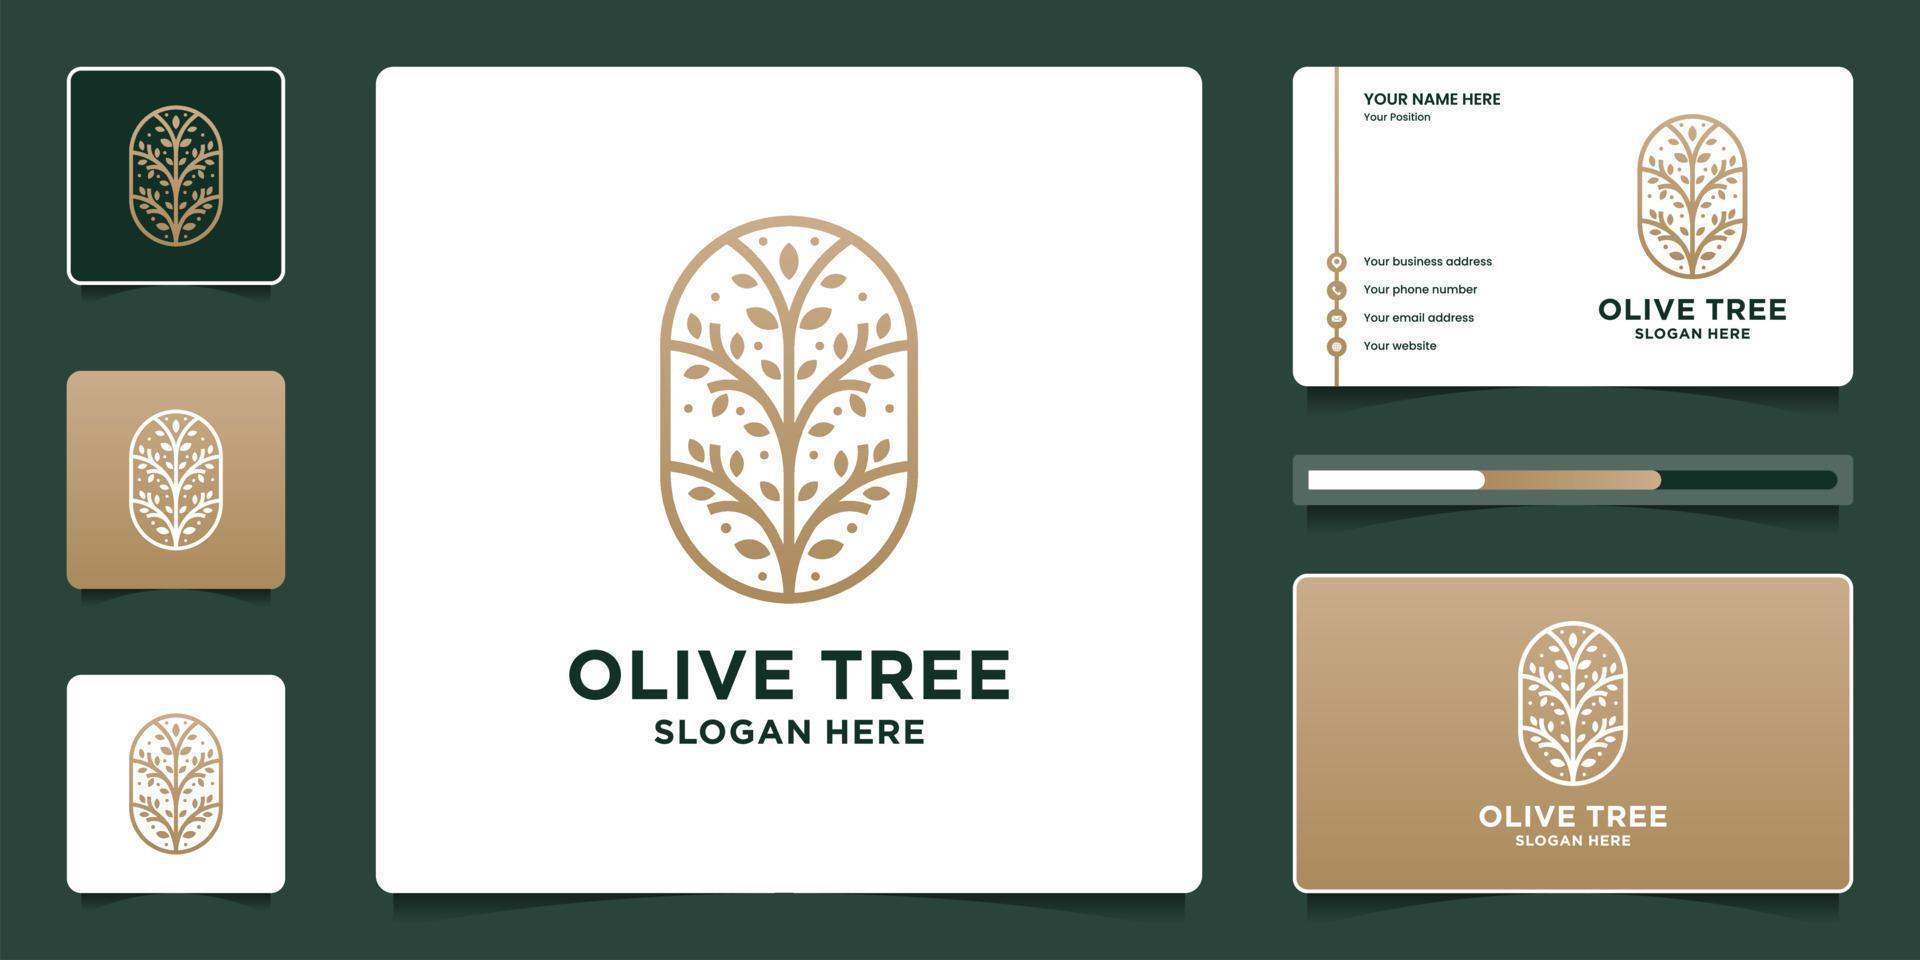 Luxury olive tree logo design and business card template vector